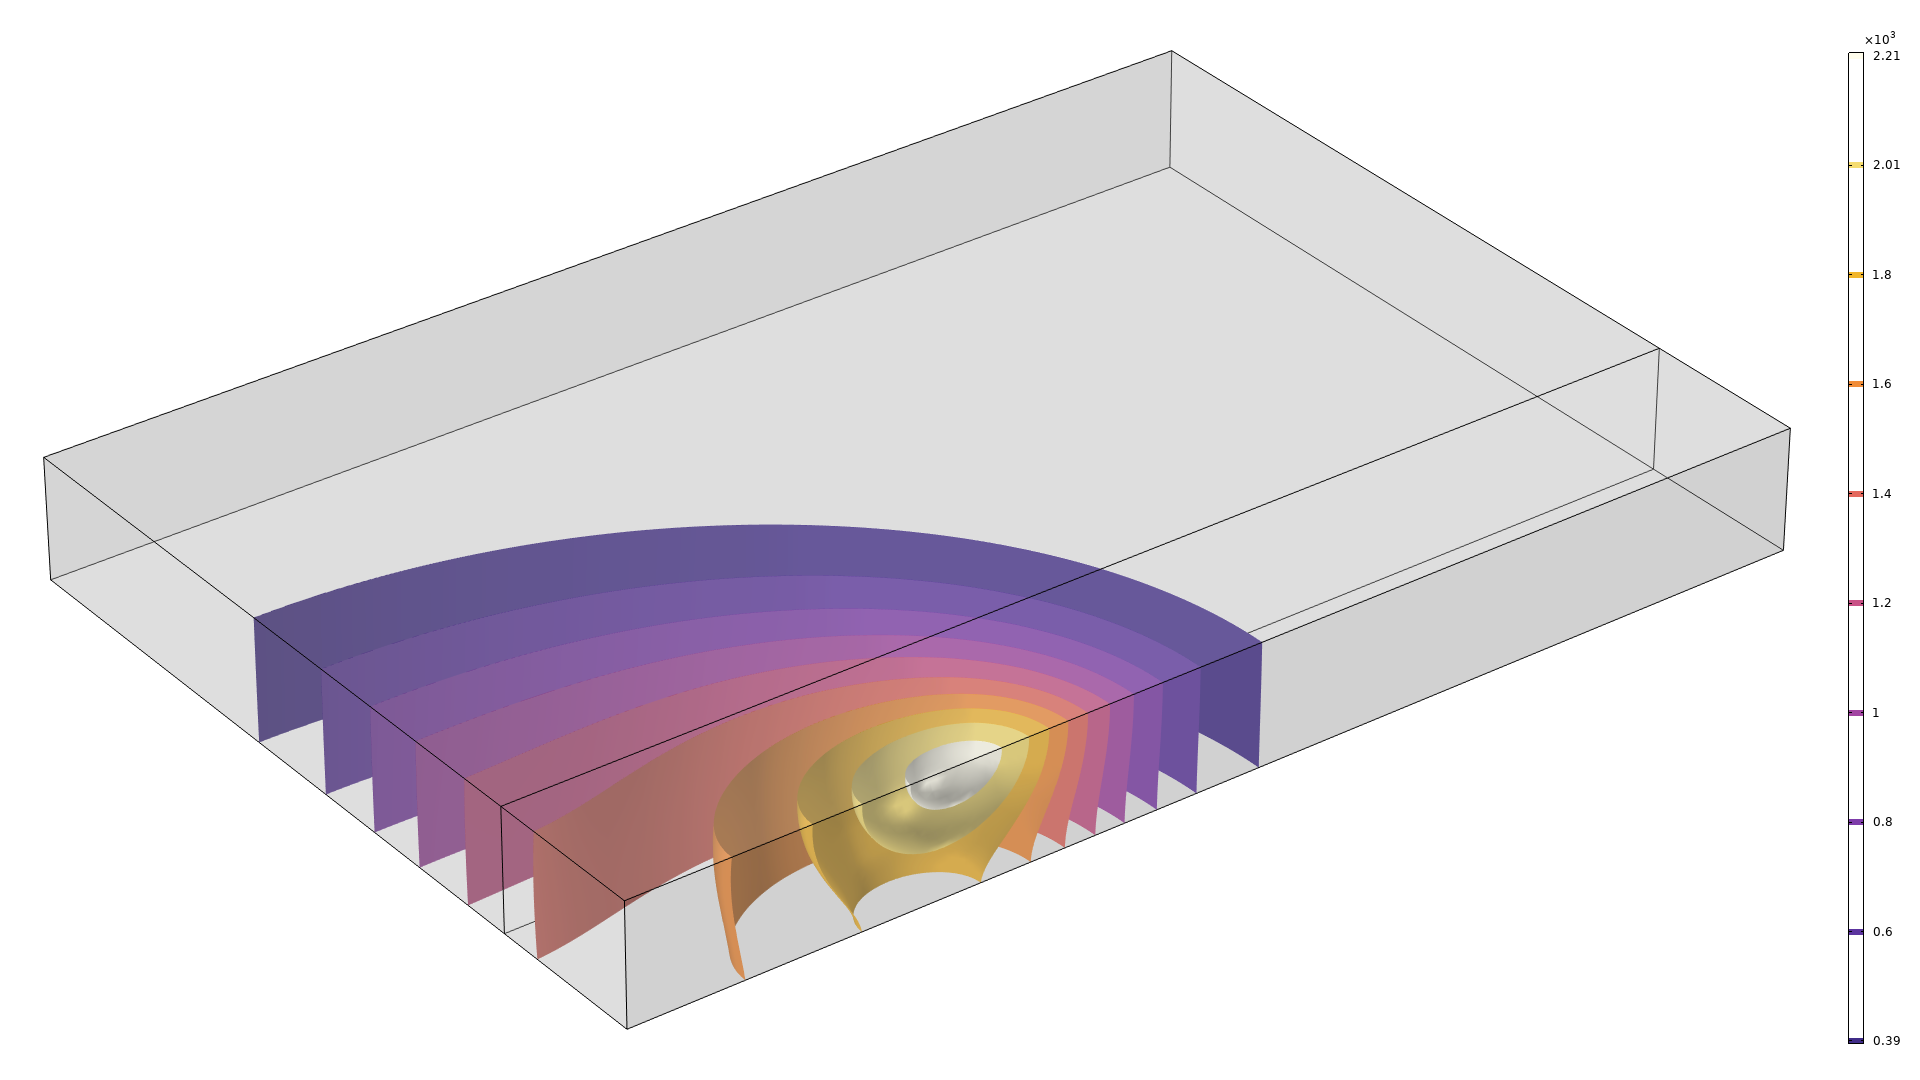 A titanium plate model showing the isothermal contours in the Heat Camera Light color table.